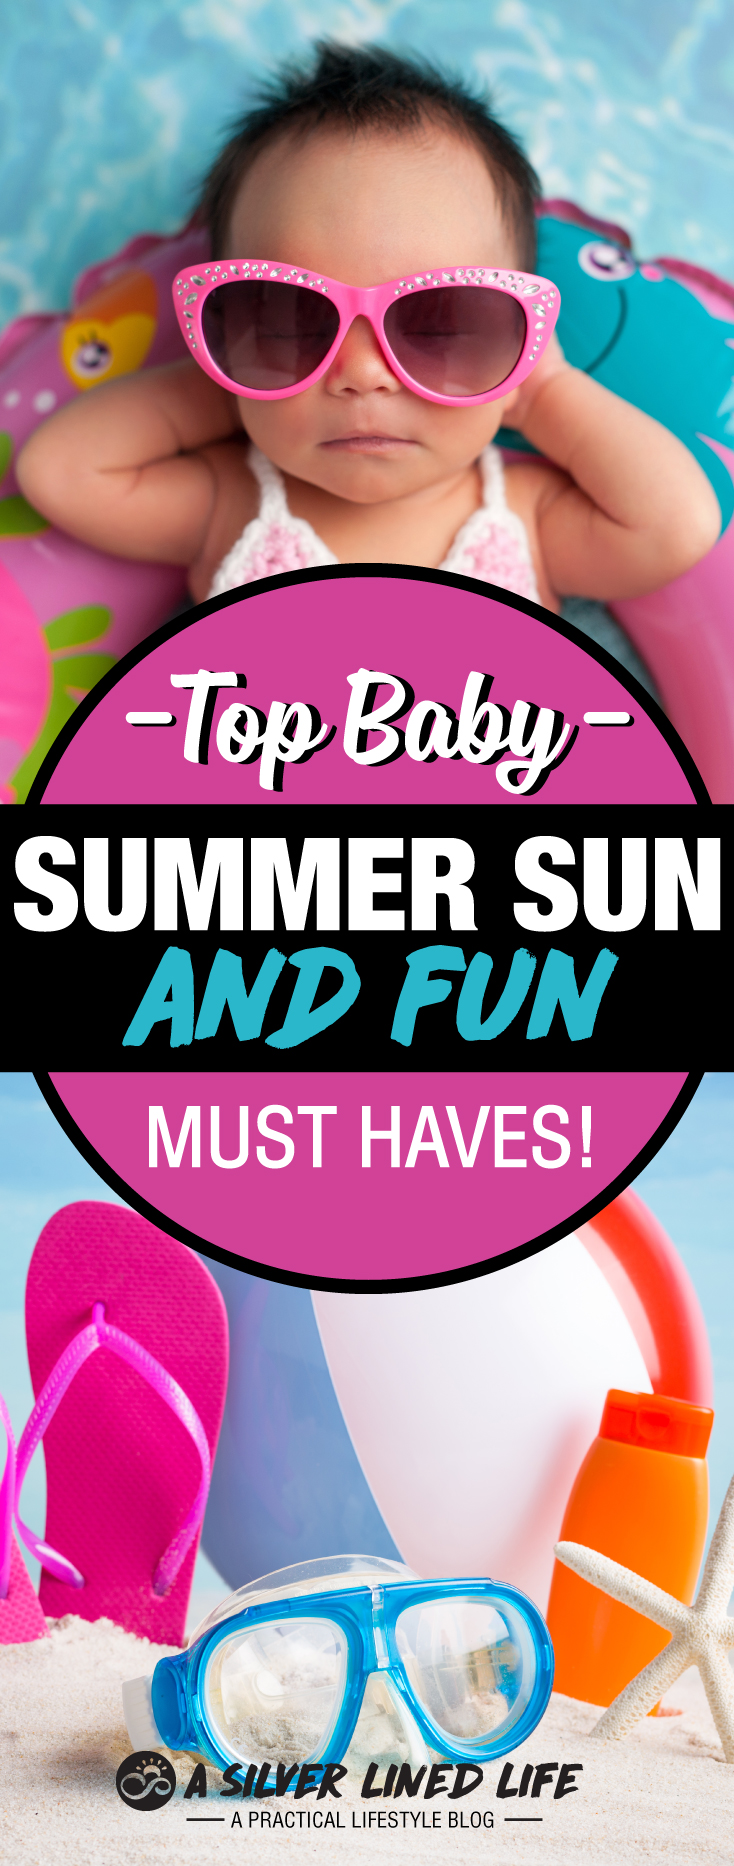 Top Baby Summer Sun & Fun, Must Haves! The best baby stuff you need for summer and protecting your little one from the sun. Everything from swimsuits and sunscreen to floats and sunglasses. Check it out!